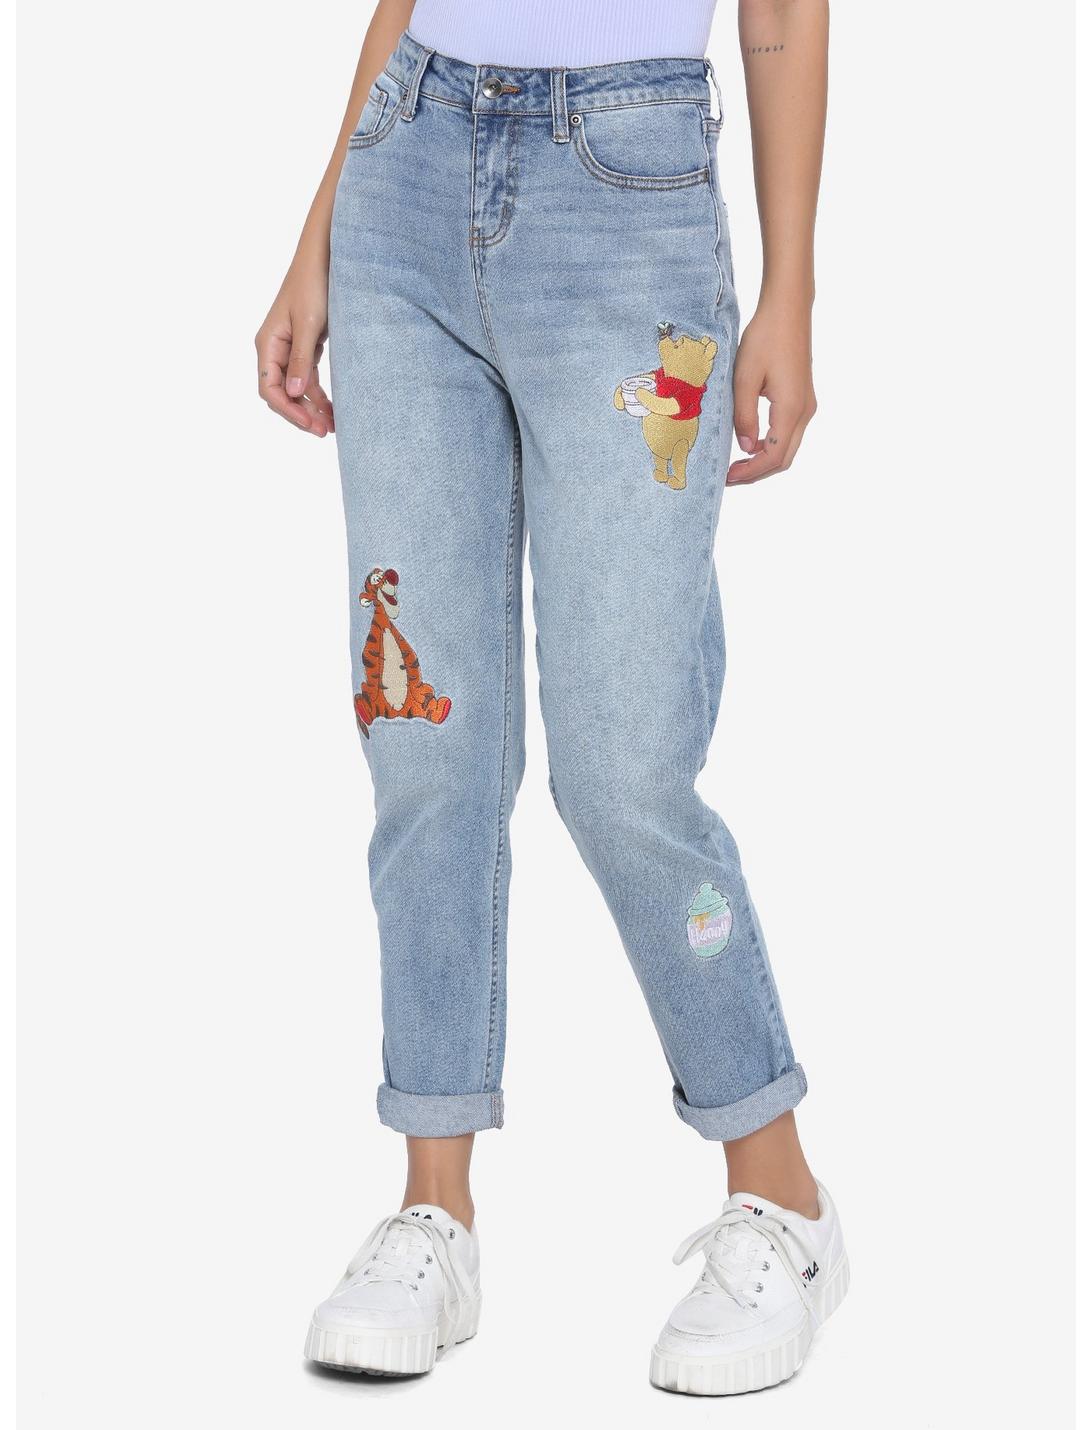 Disney Winnie The Pooh Embroidered Mom Jeans, LIGHT BLUE, hi-res